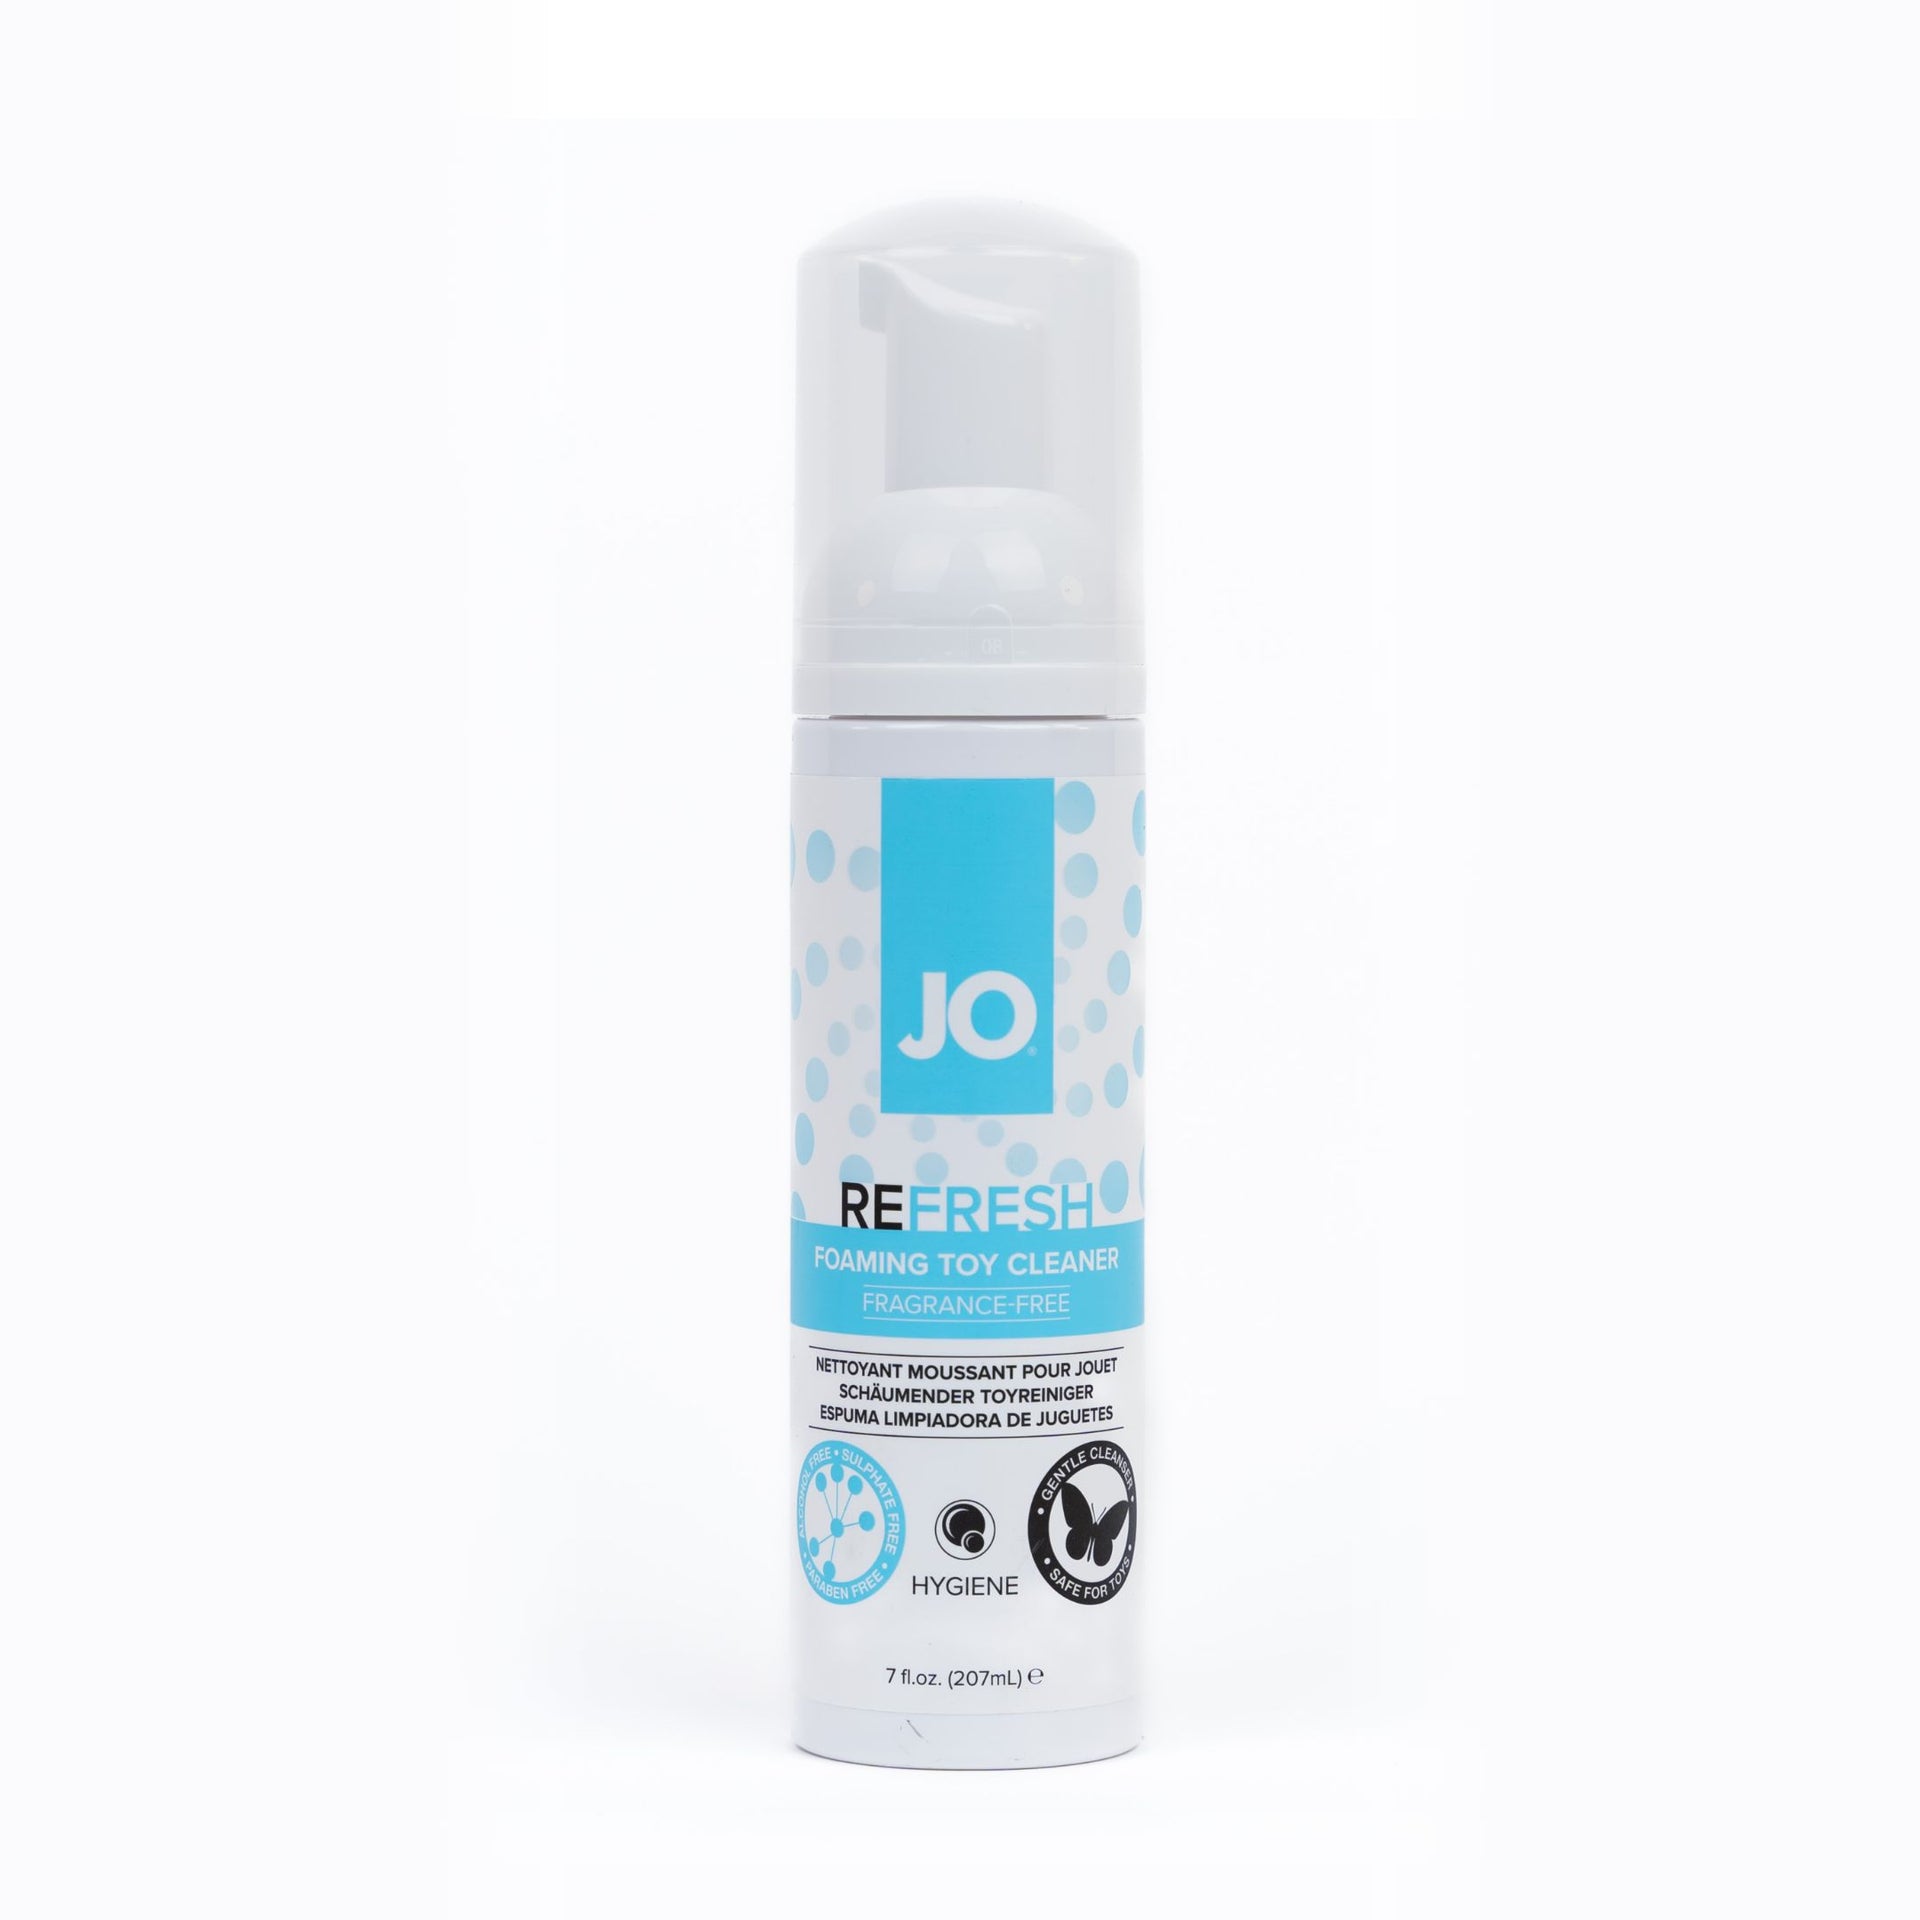 Refresh Foaming Toy Cleaner